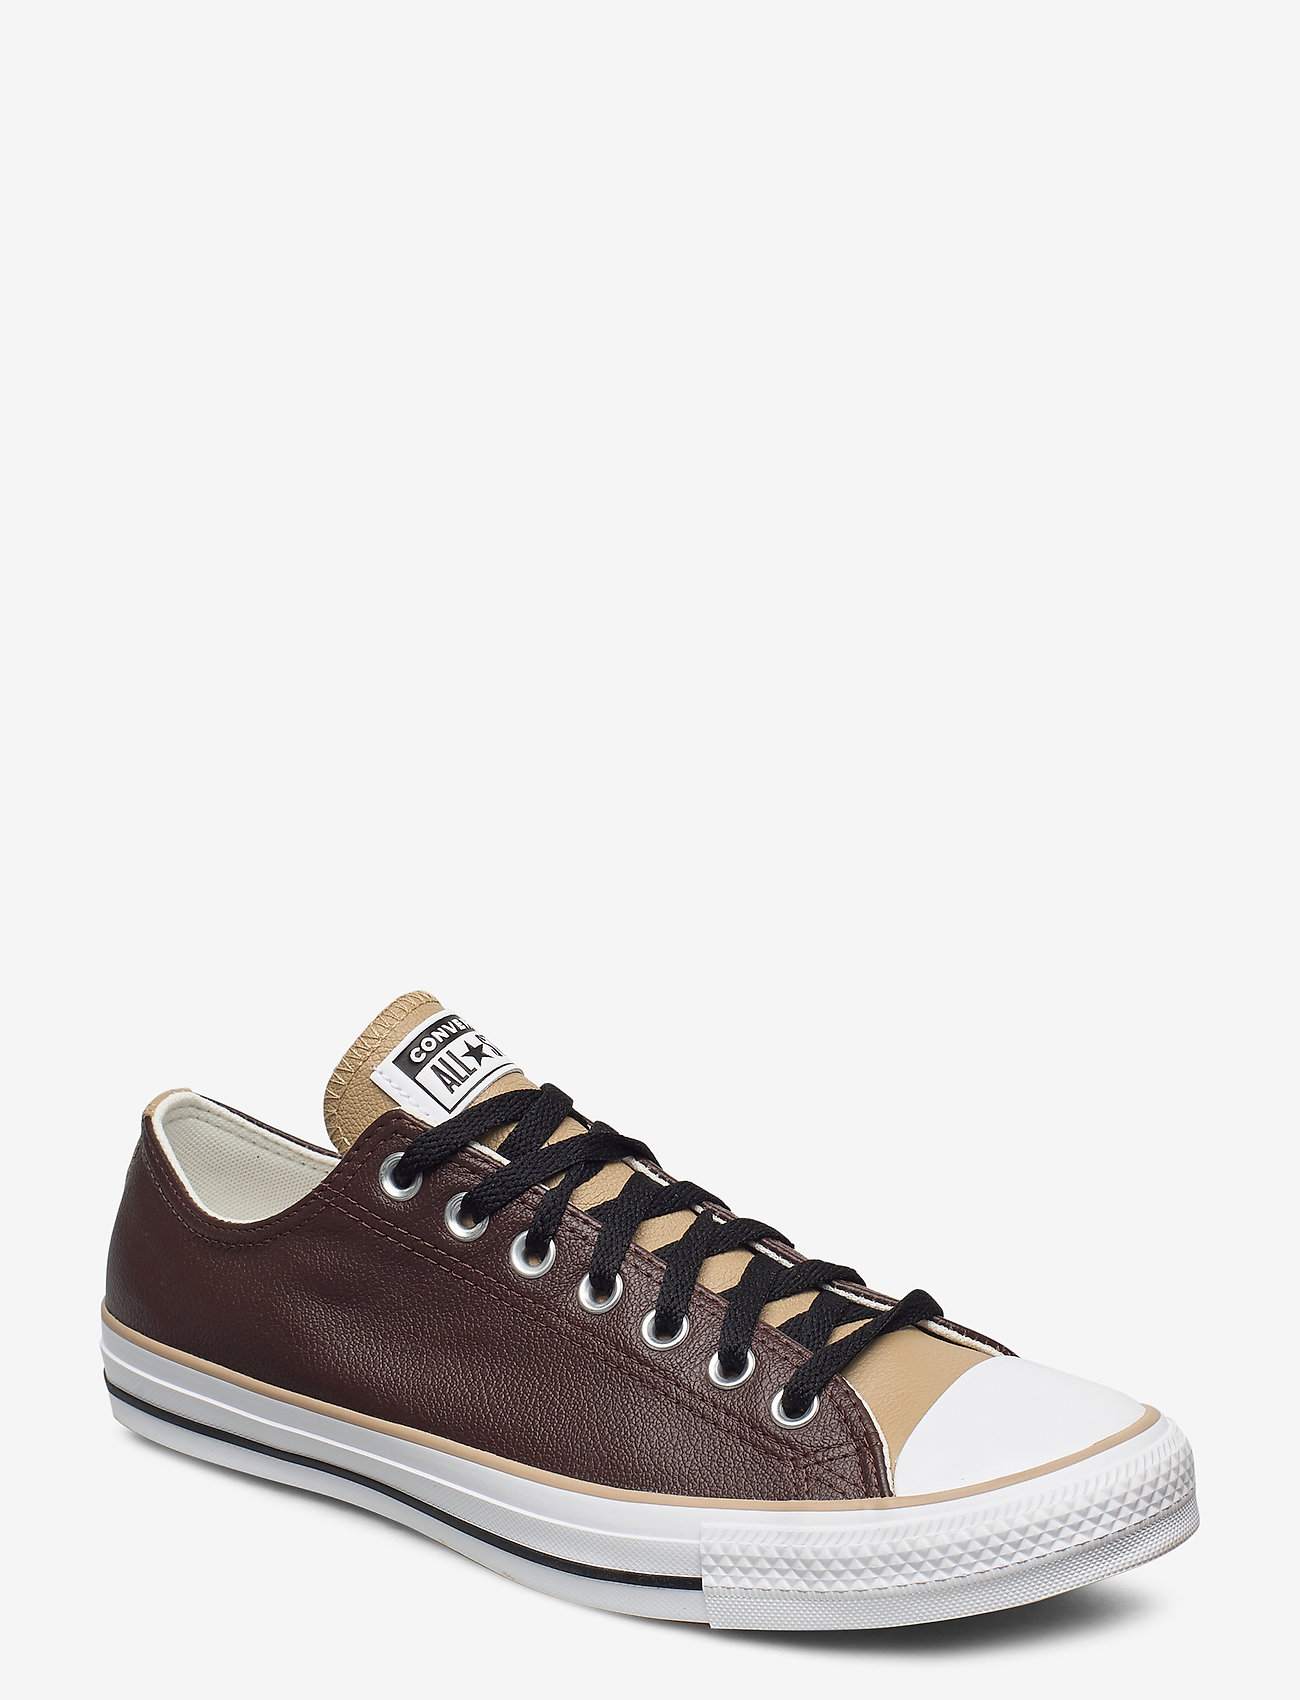 converse all star leather ox low tan brown